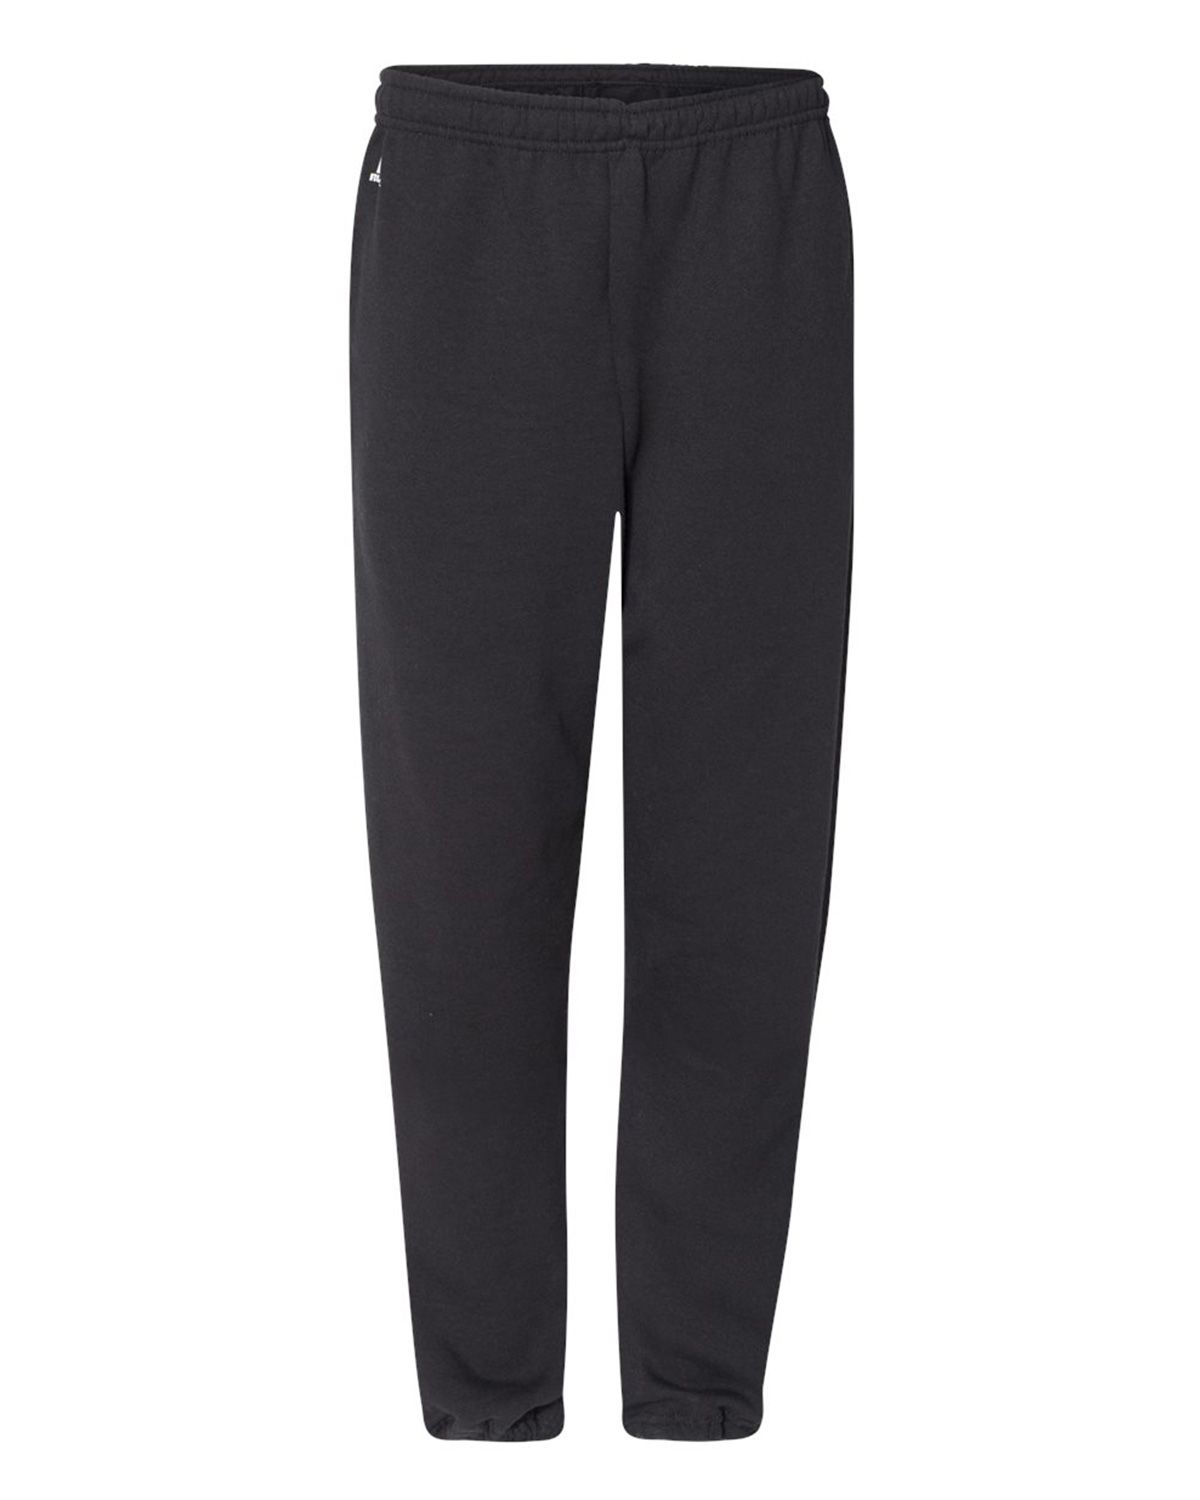 russell athletic pants mens